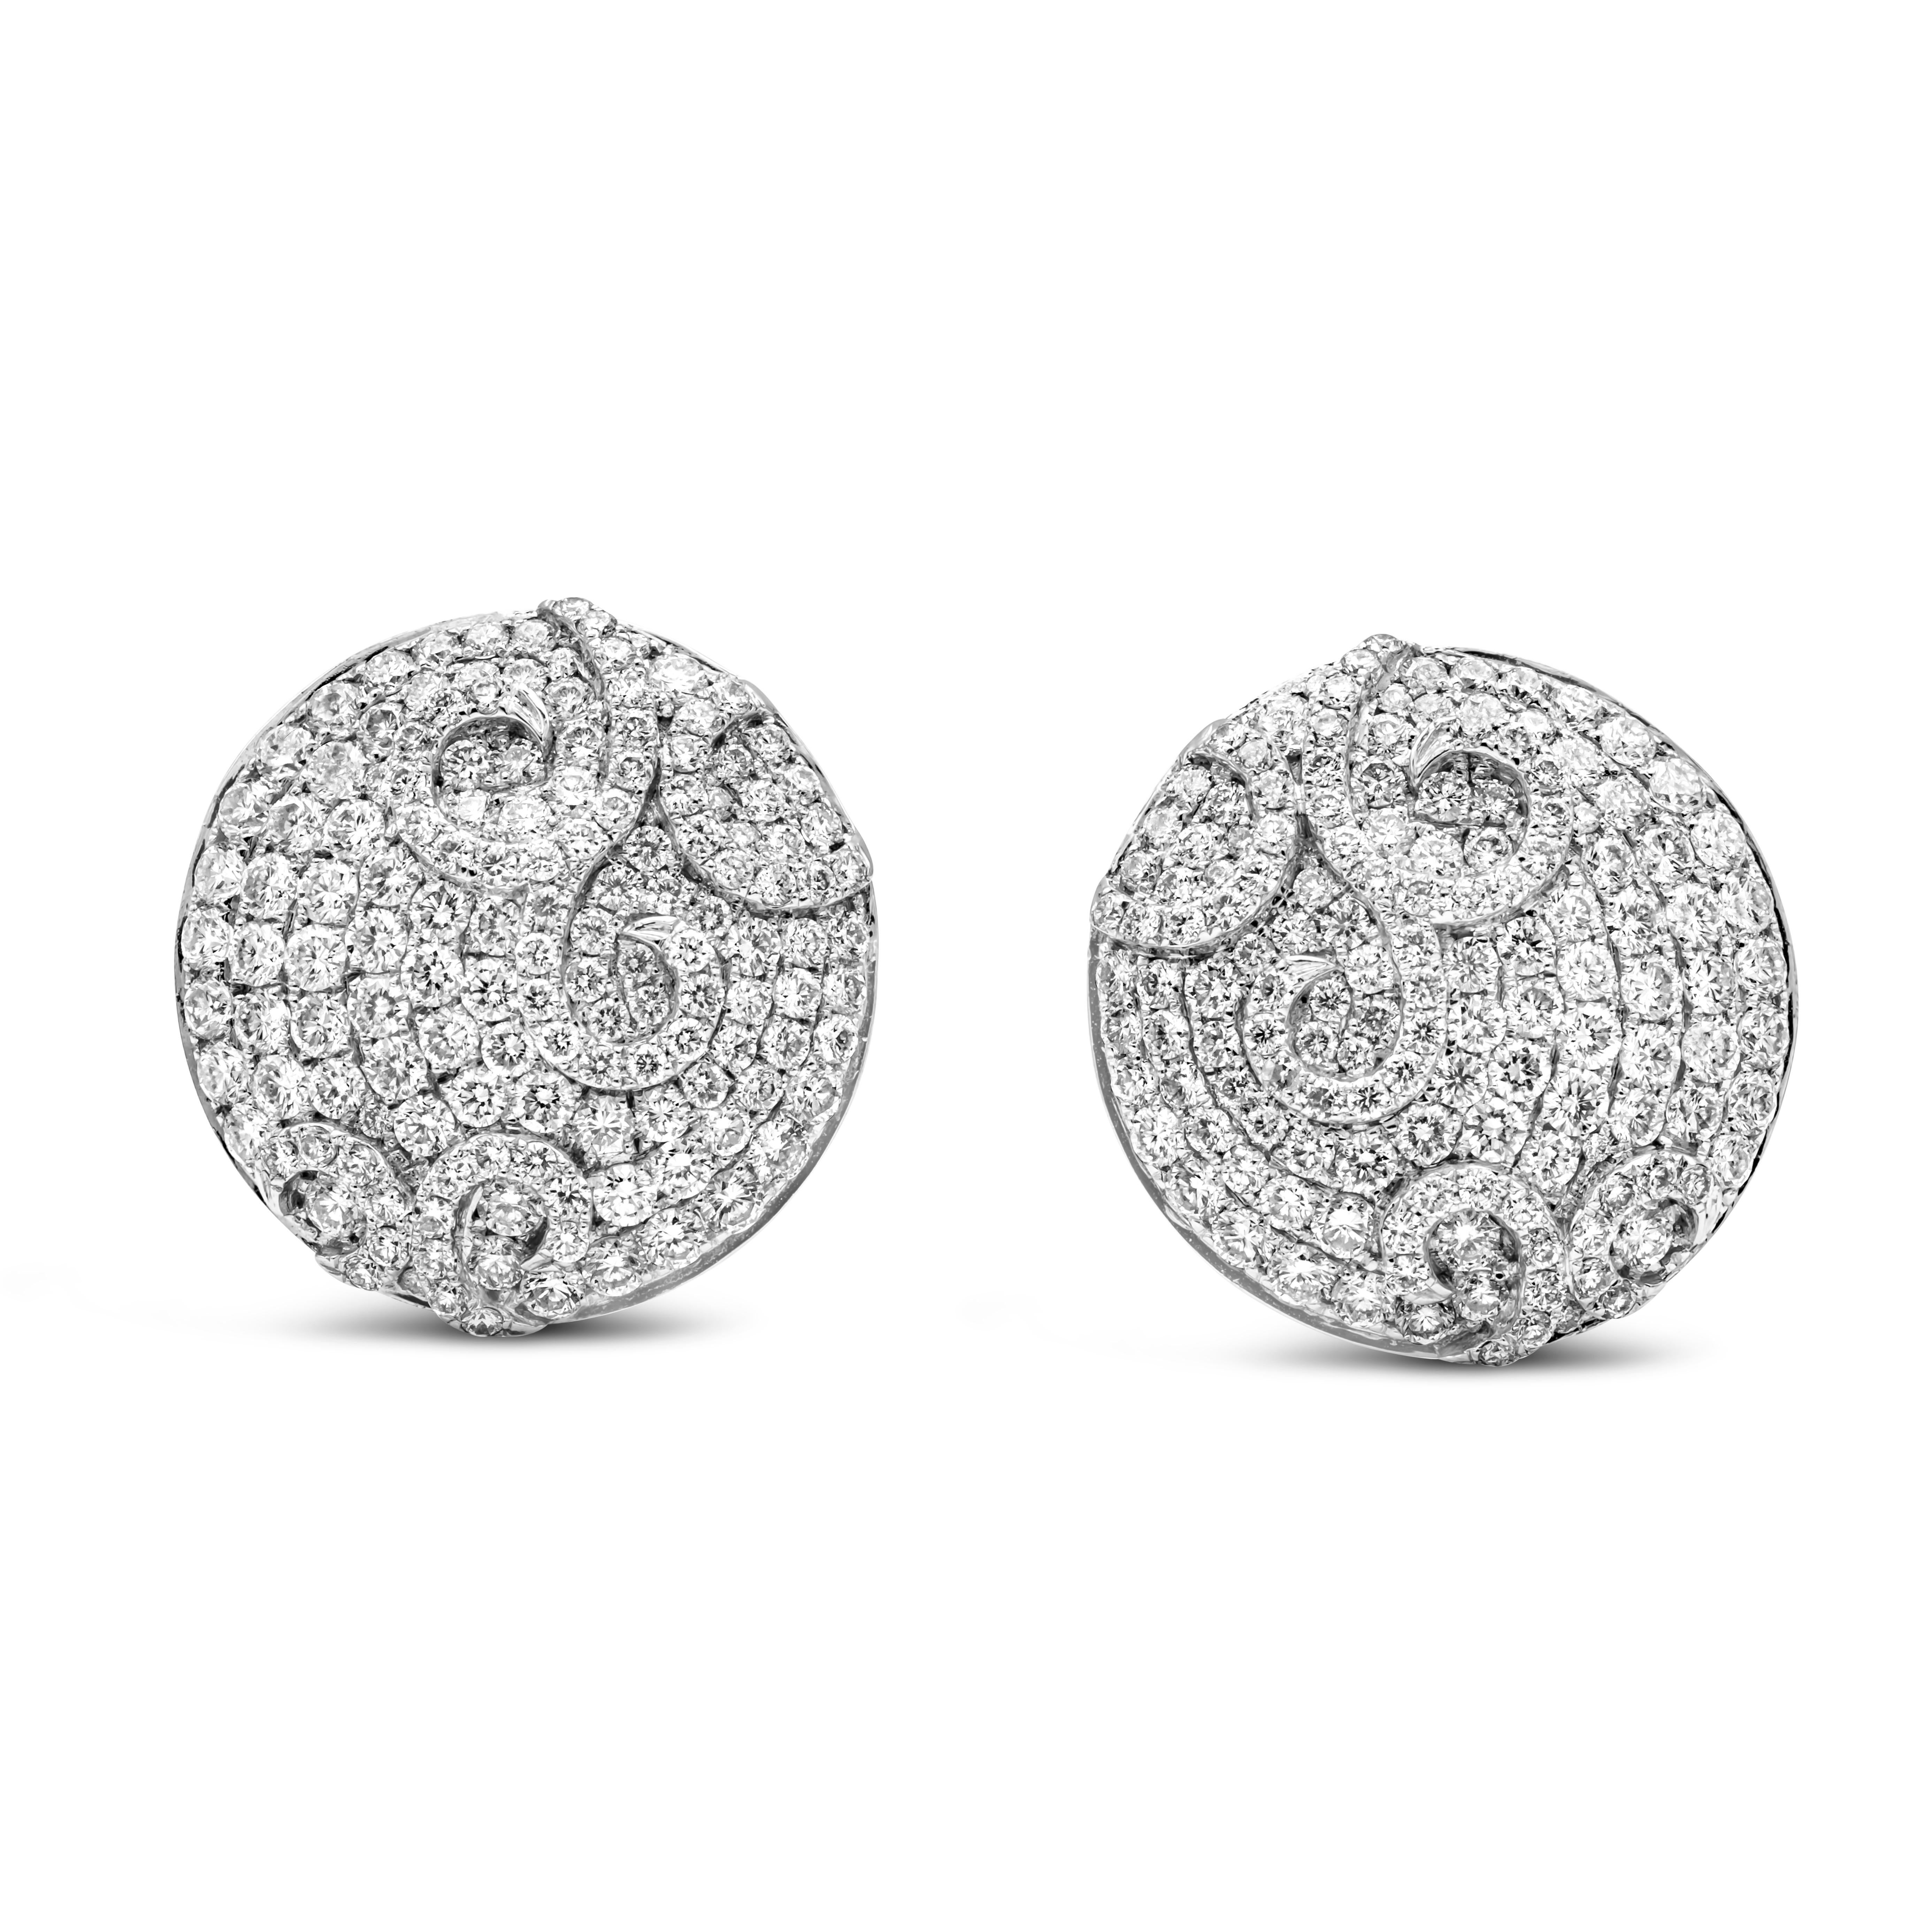 Showcasing a vibrant pair of cufflinks set in an intricate pave design setting with 288 brilliant round cut diamonds weighing 5.20 carats total, whale back design and Finely made in 18k white gold.

F color VS clarity